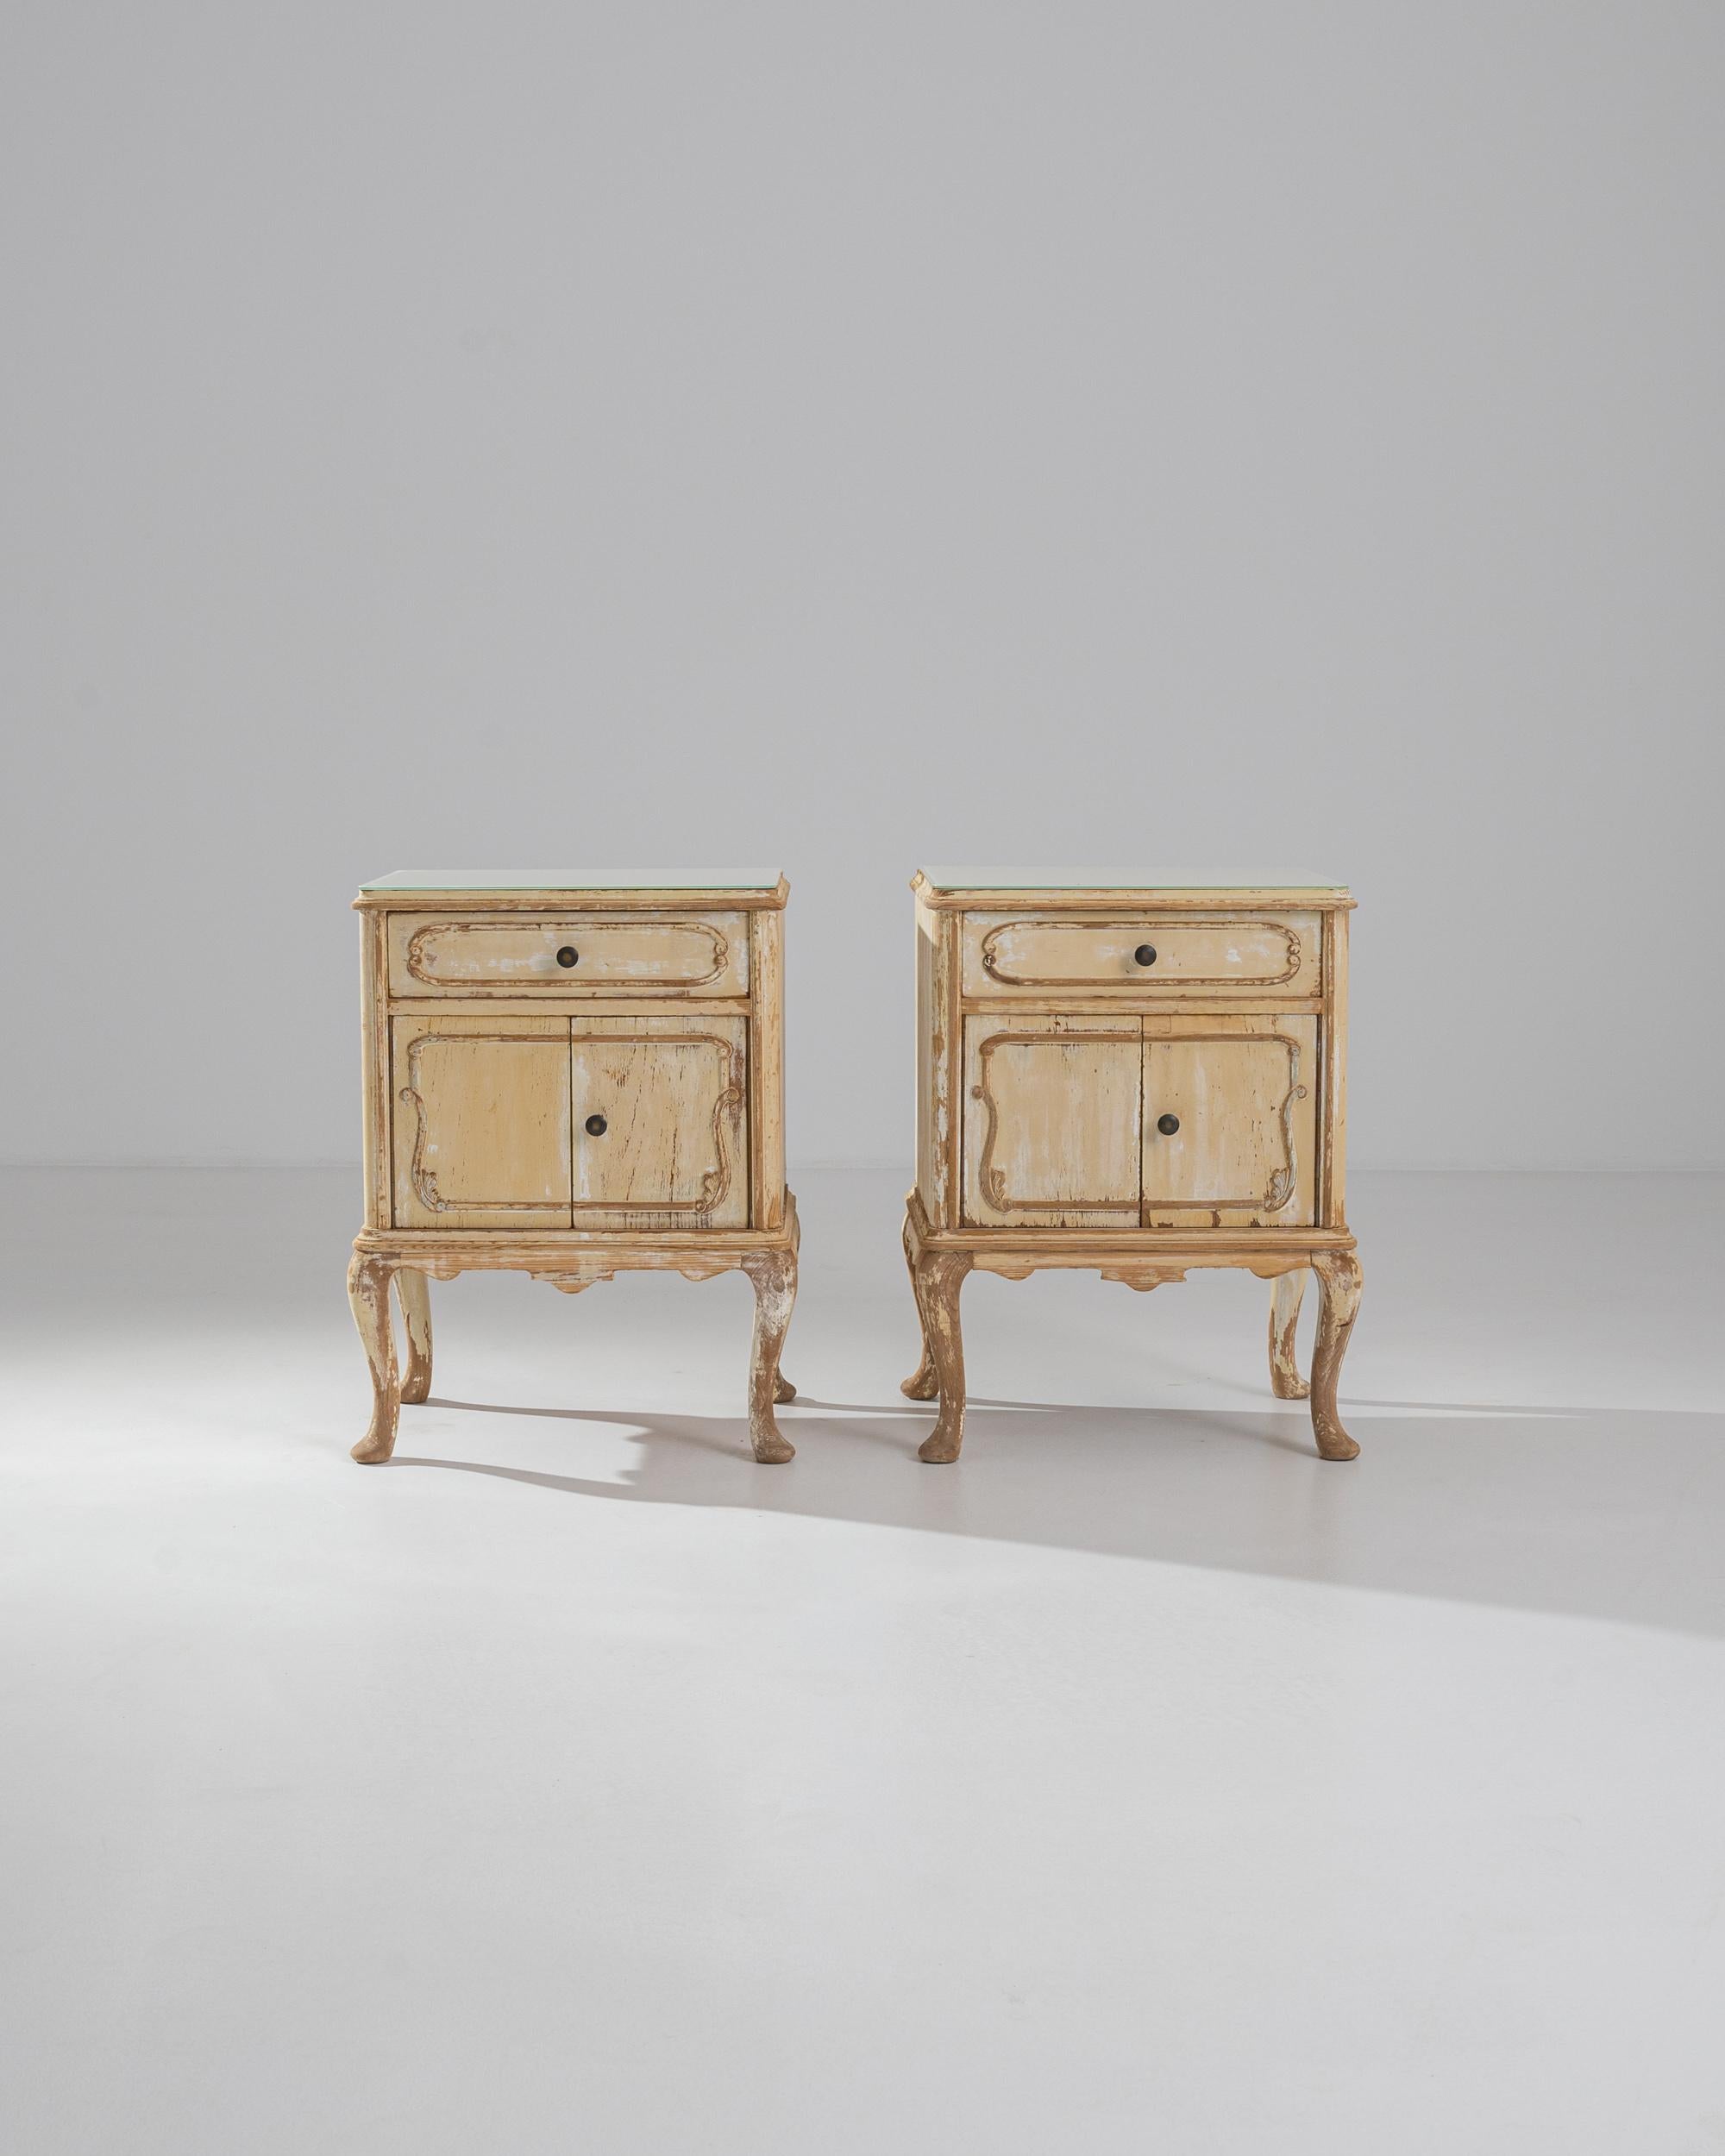 A pair of 20th century wood bedside tables with white glass tops. A creamy white patina spreads across these two bedside tables, creating a peachy brightness. With each table fitted with a drawer and storage compartment, they offer a functionality